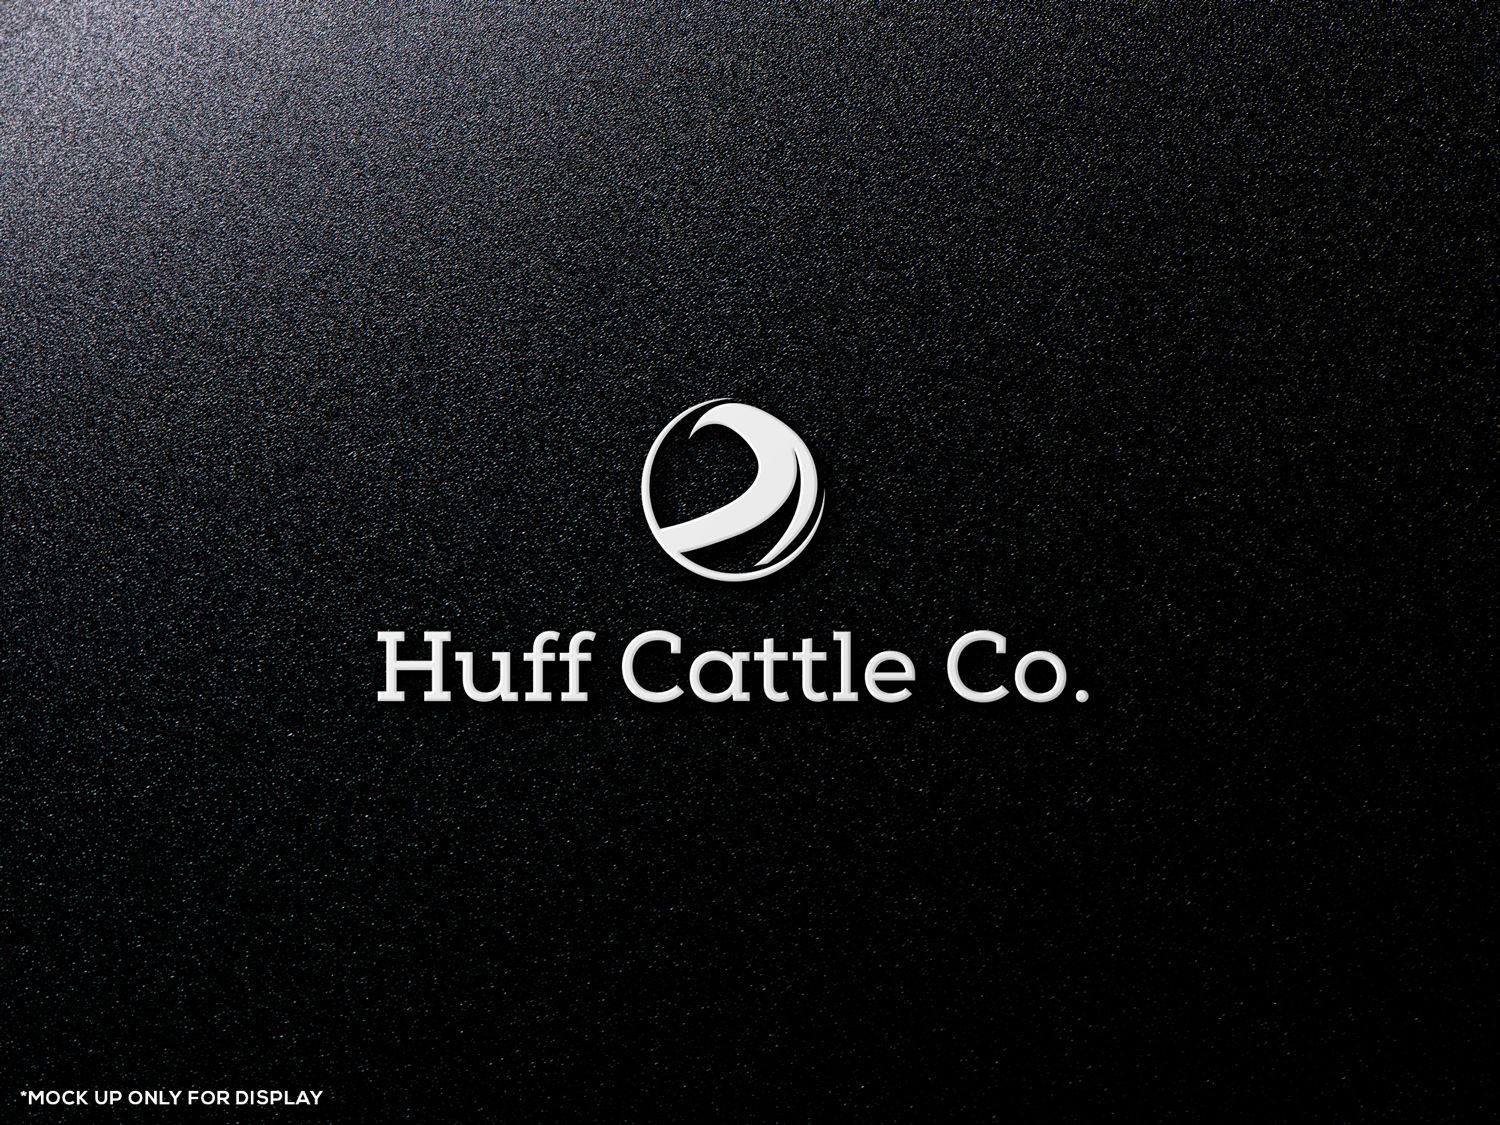 Huff Black and White Logo - Professional, Serious Logo Design for Huff Cattle Co. by ...